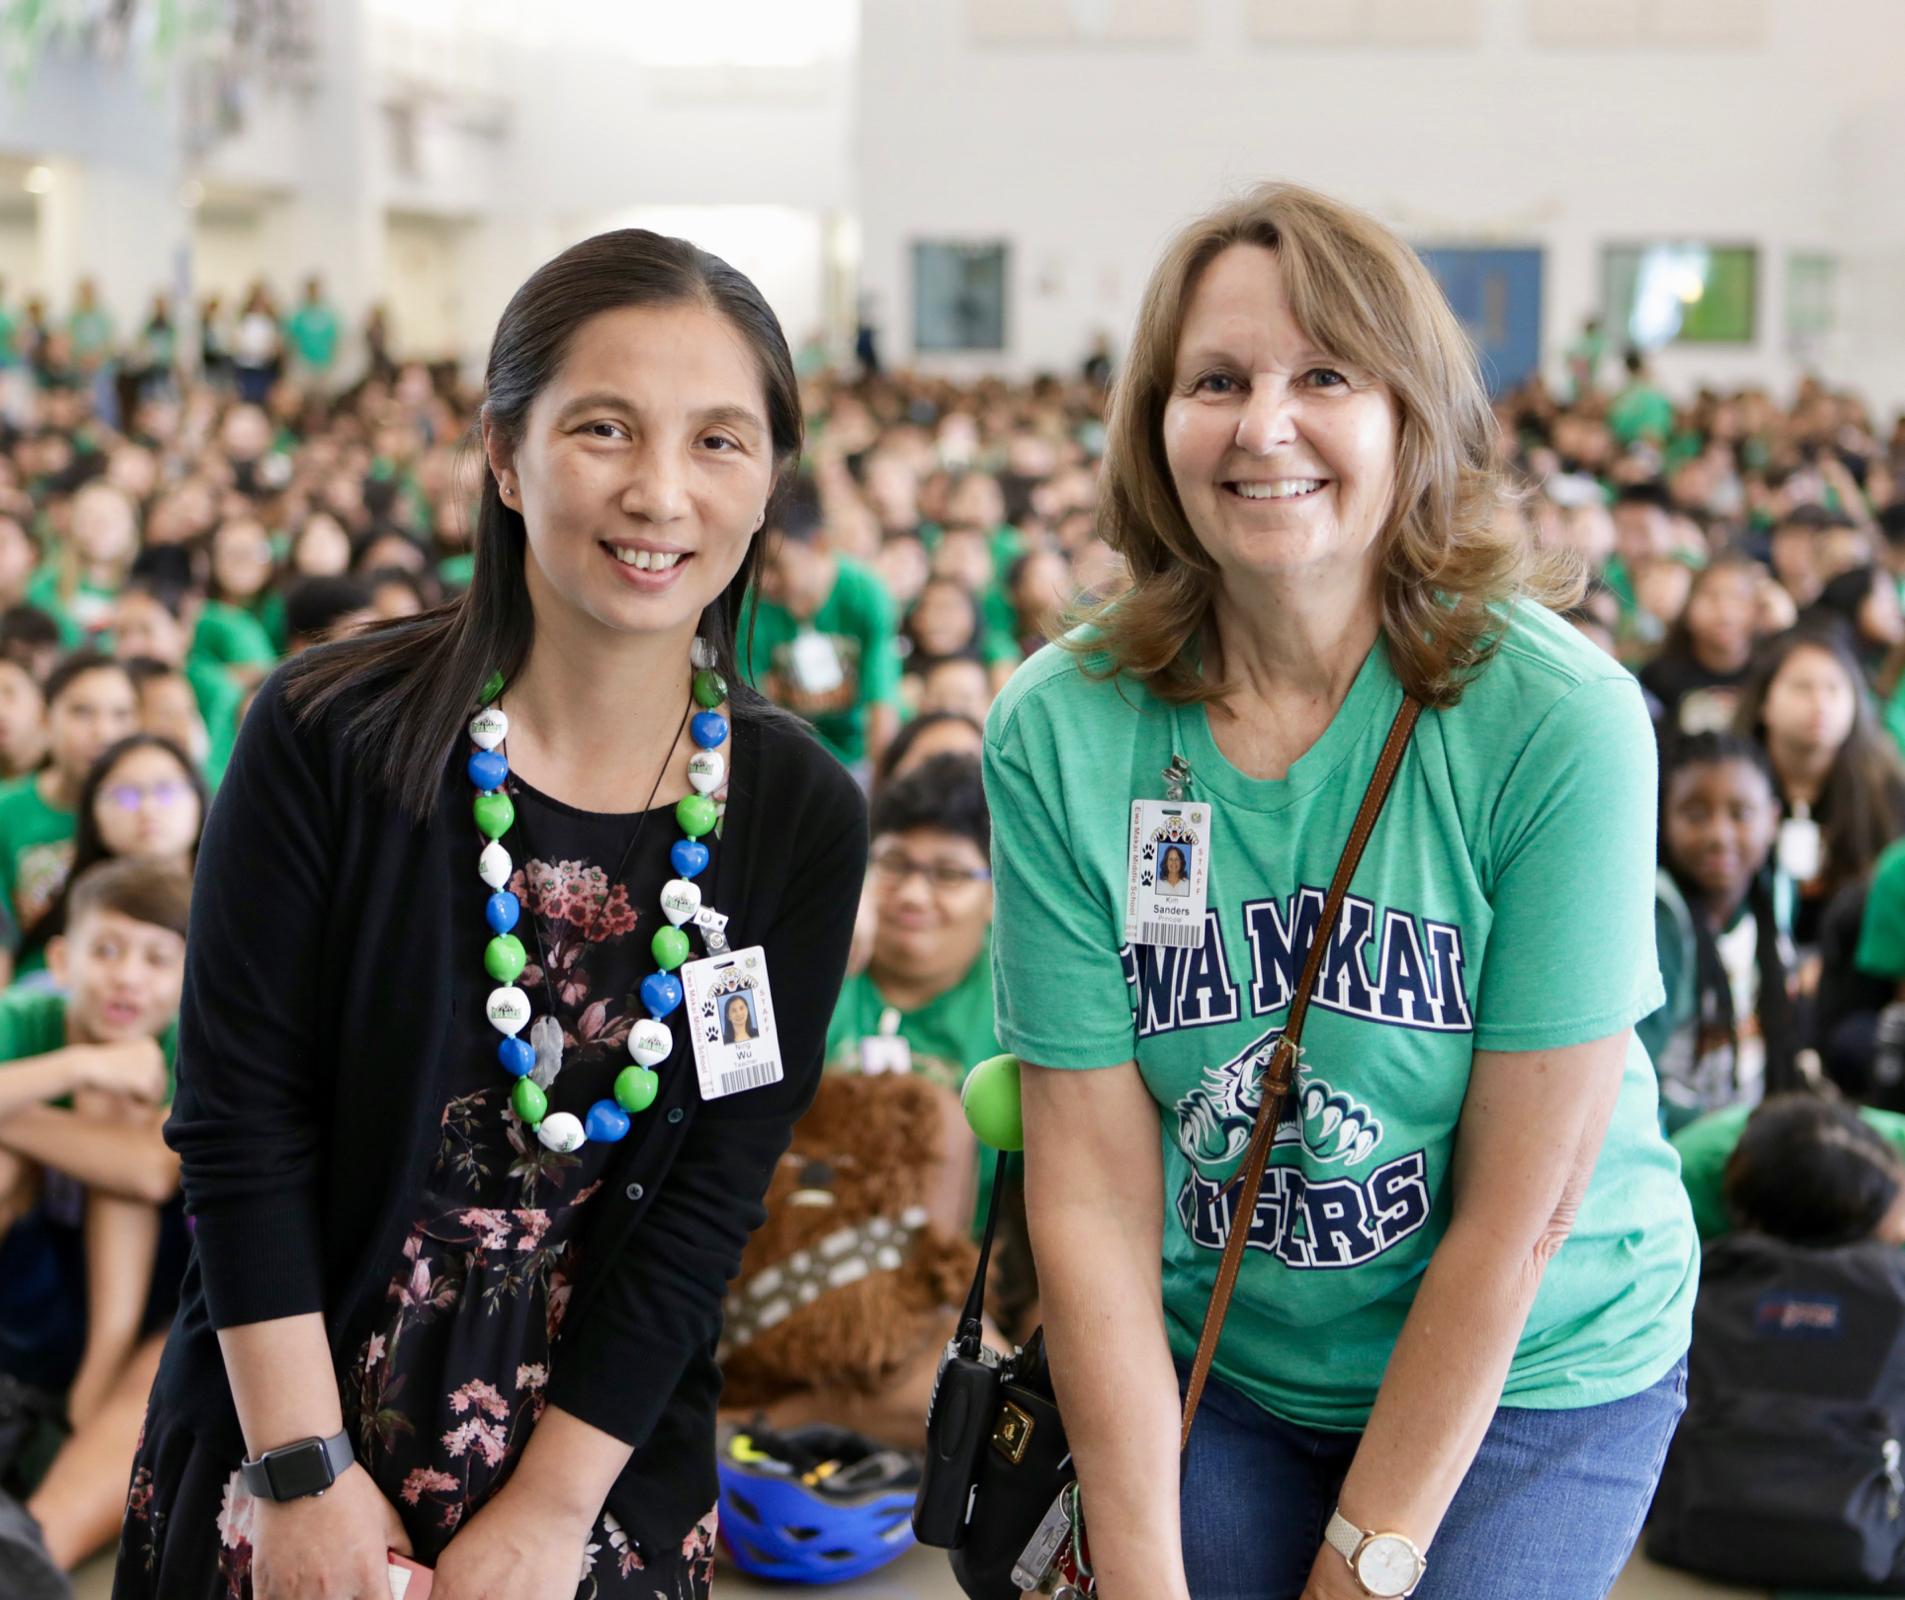 Two teachers in front of a large assembly of students